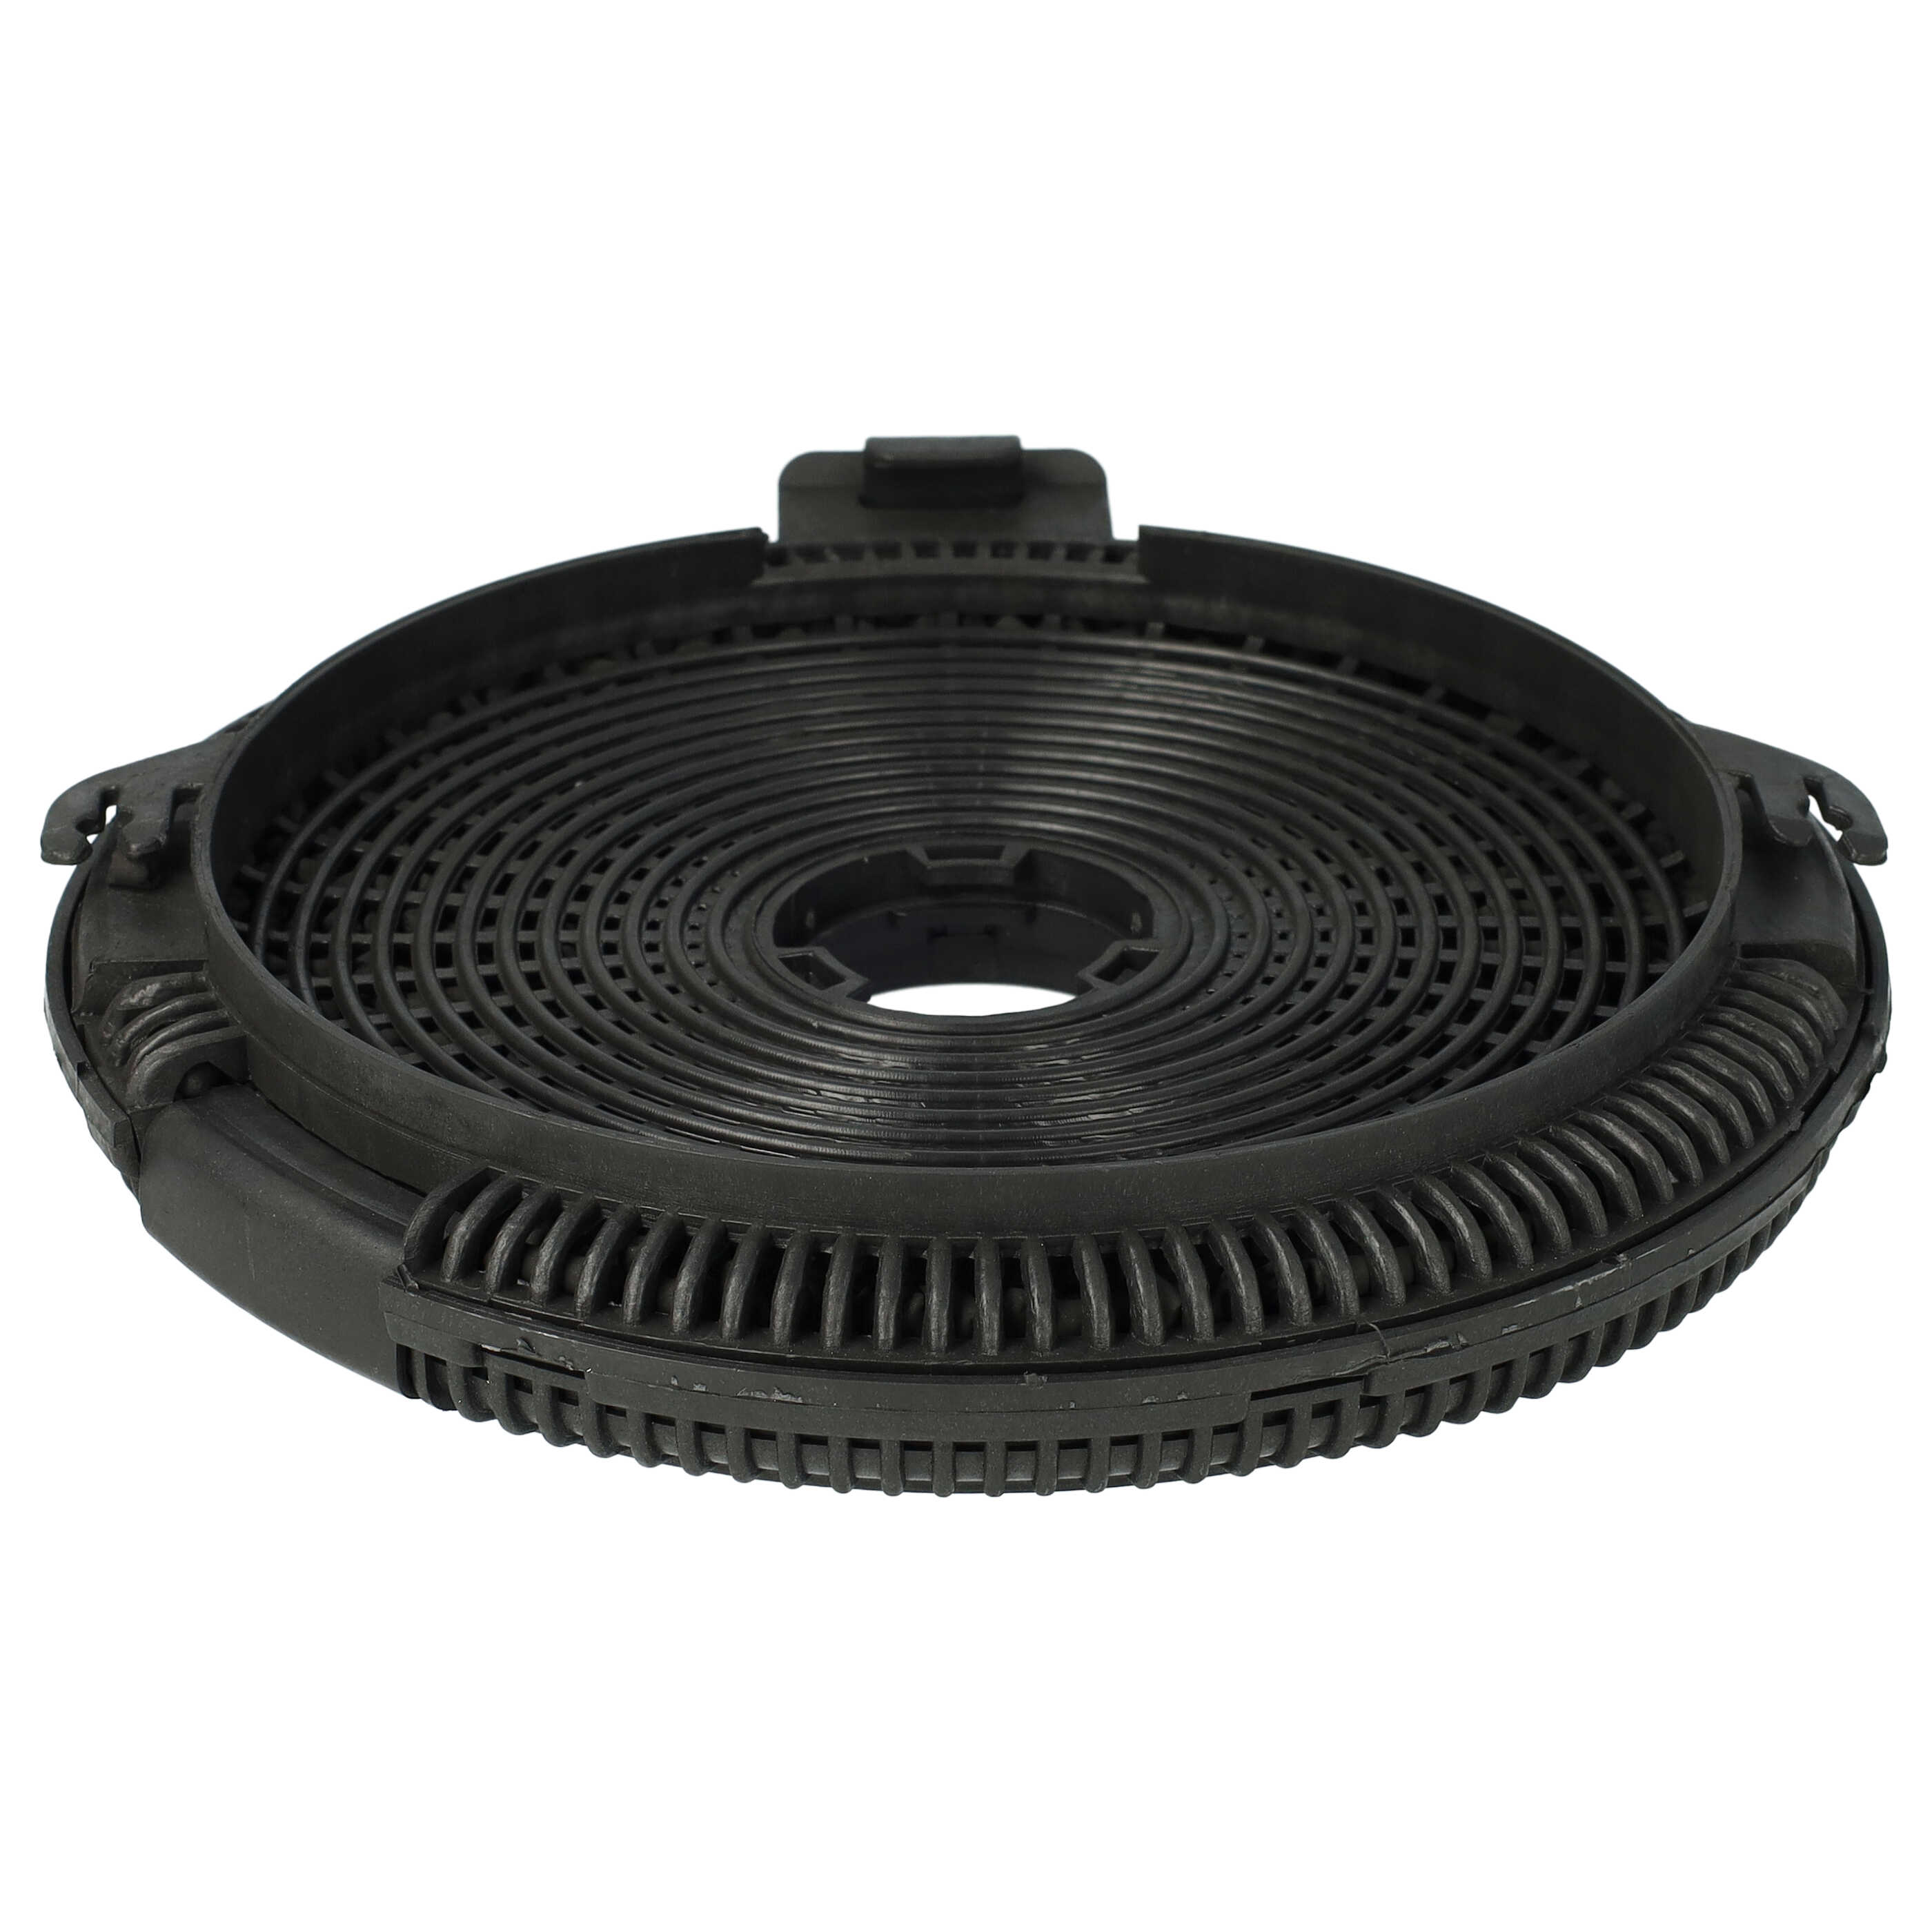 Activated Carbon Filter as Replacement for Küppersbusch ZUB 881 for Teka Hob etc. - 20 cm